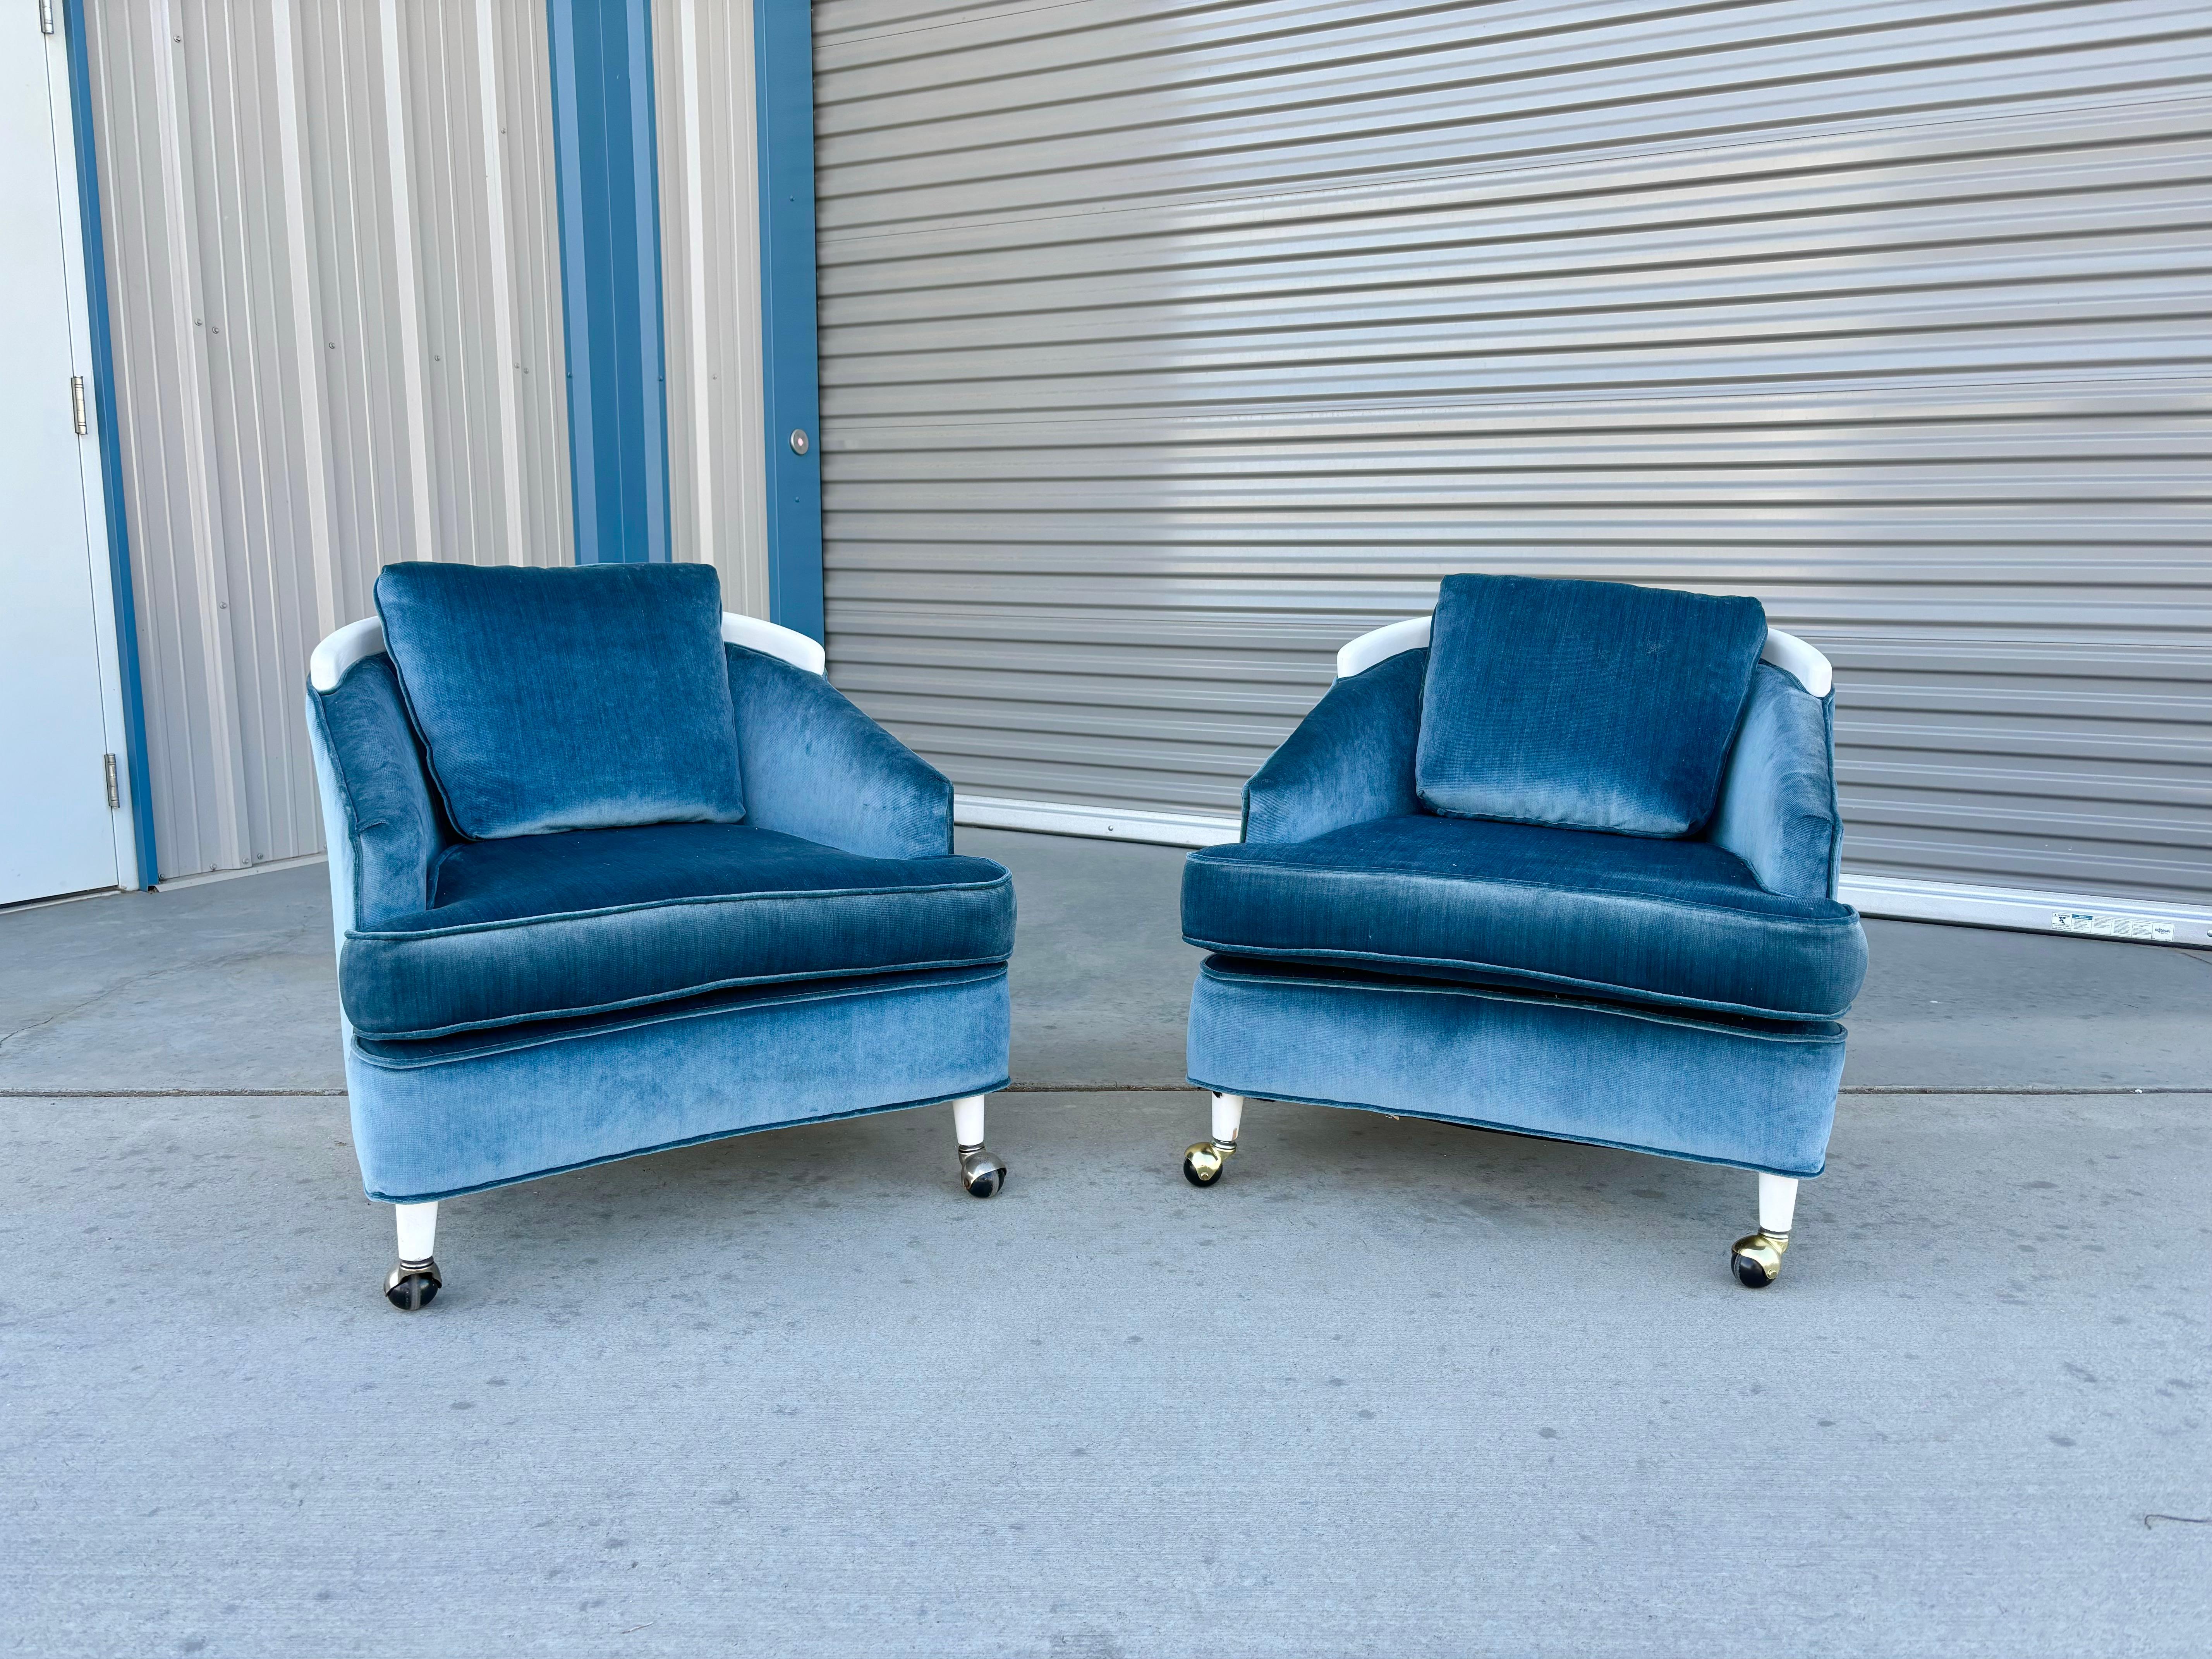 1960s Mid Century Modern Velvet Lounge Chairs - Set of 2 In Good Condition For Sale In North Hollywood, CA